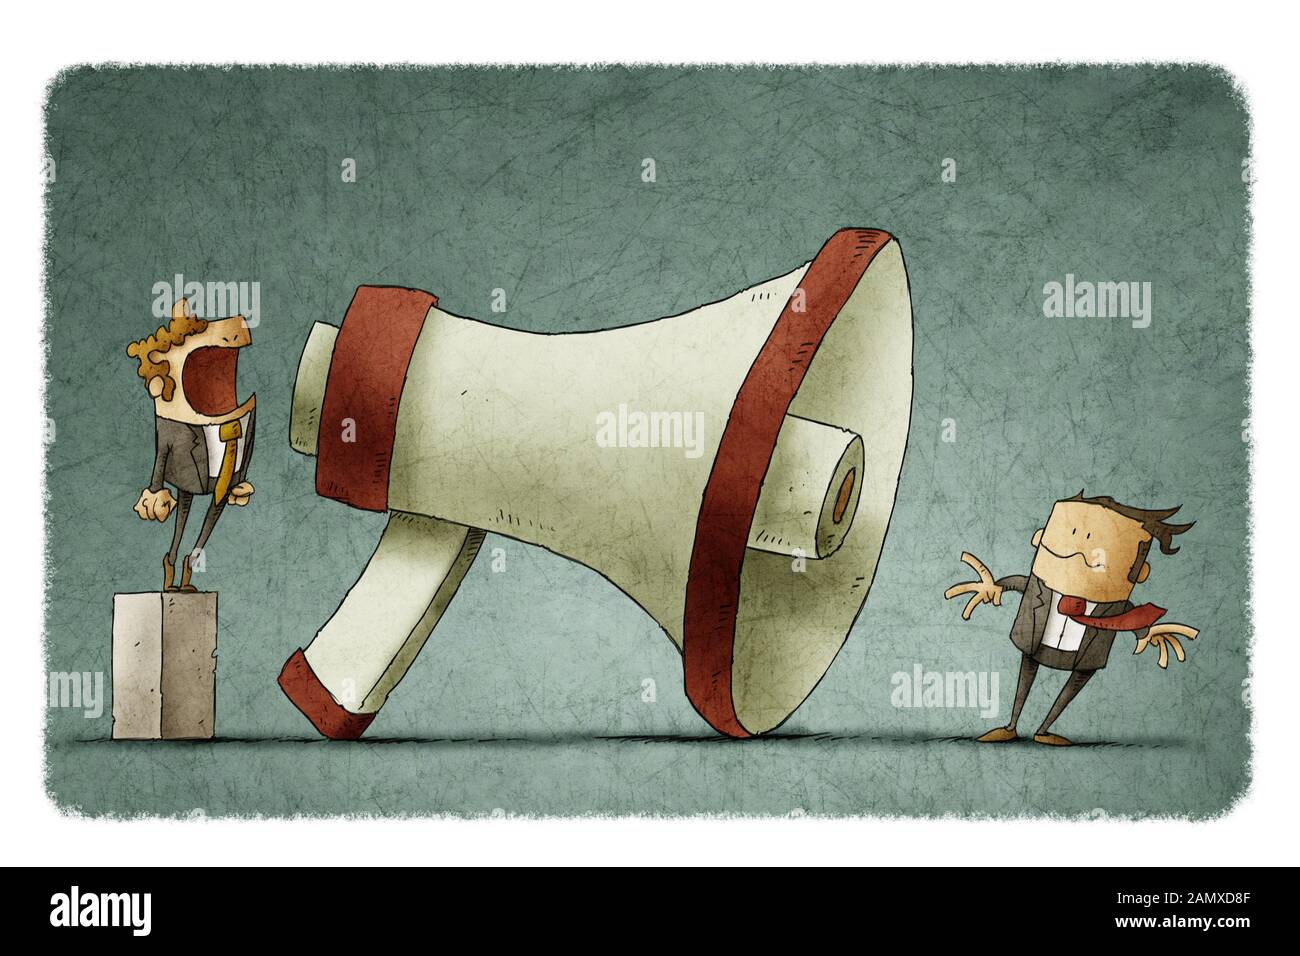 illustration of boss shouting at businessman through a big megaphone so loudly his hair being blown by strong wind. Stock Photo